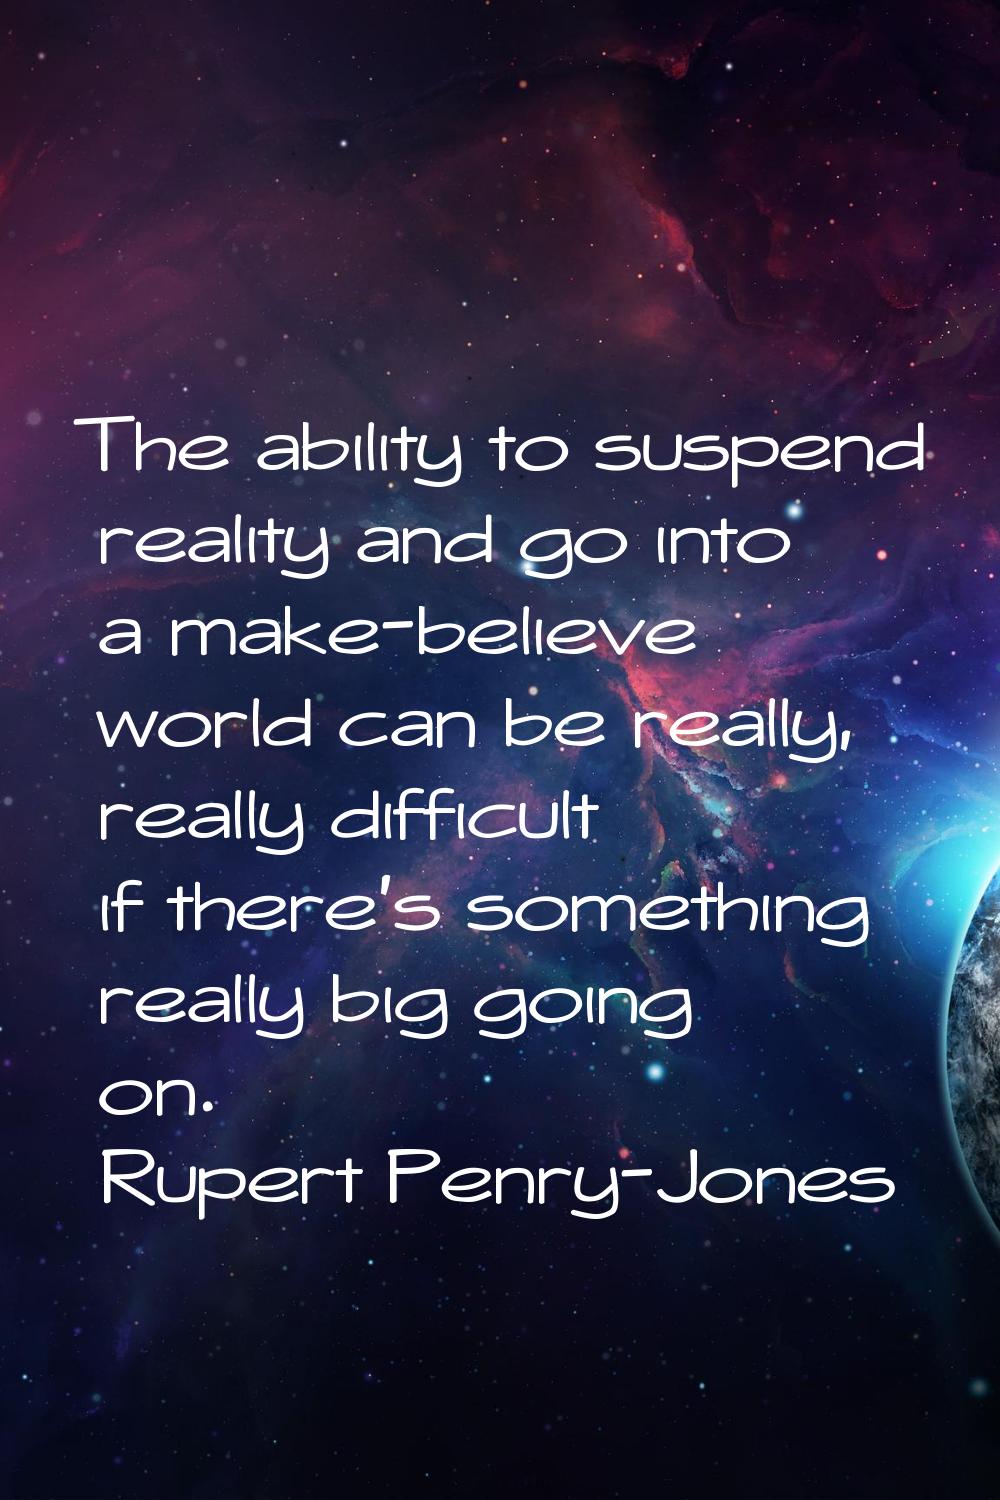 The ability to suspend reality and go into a make-believe world can be really, really difficult if 